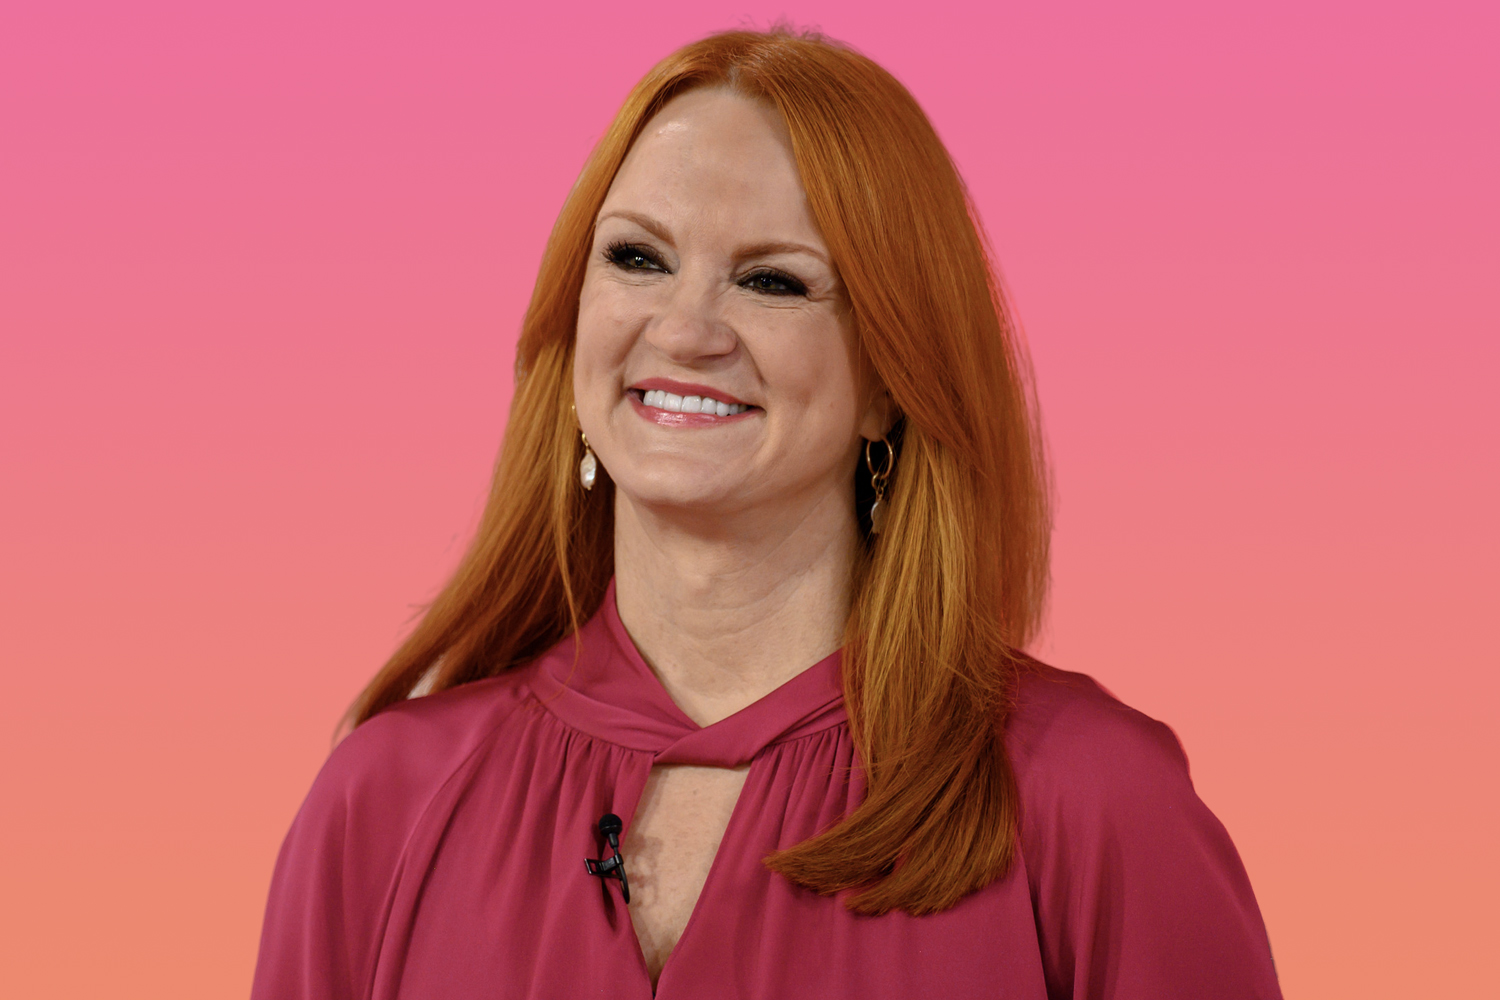 Ree Drummond smiling and wearing a fuchsia-colored top